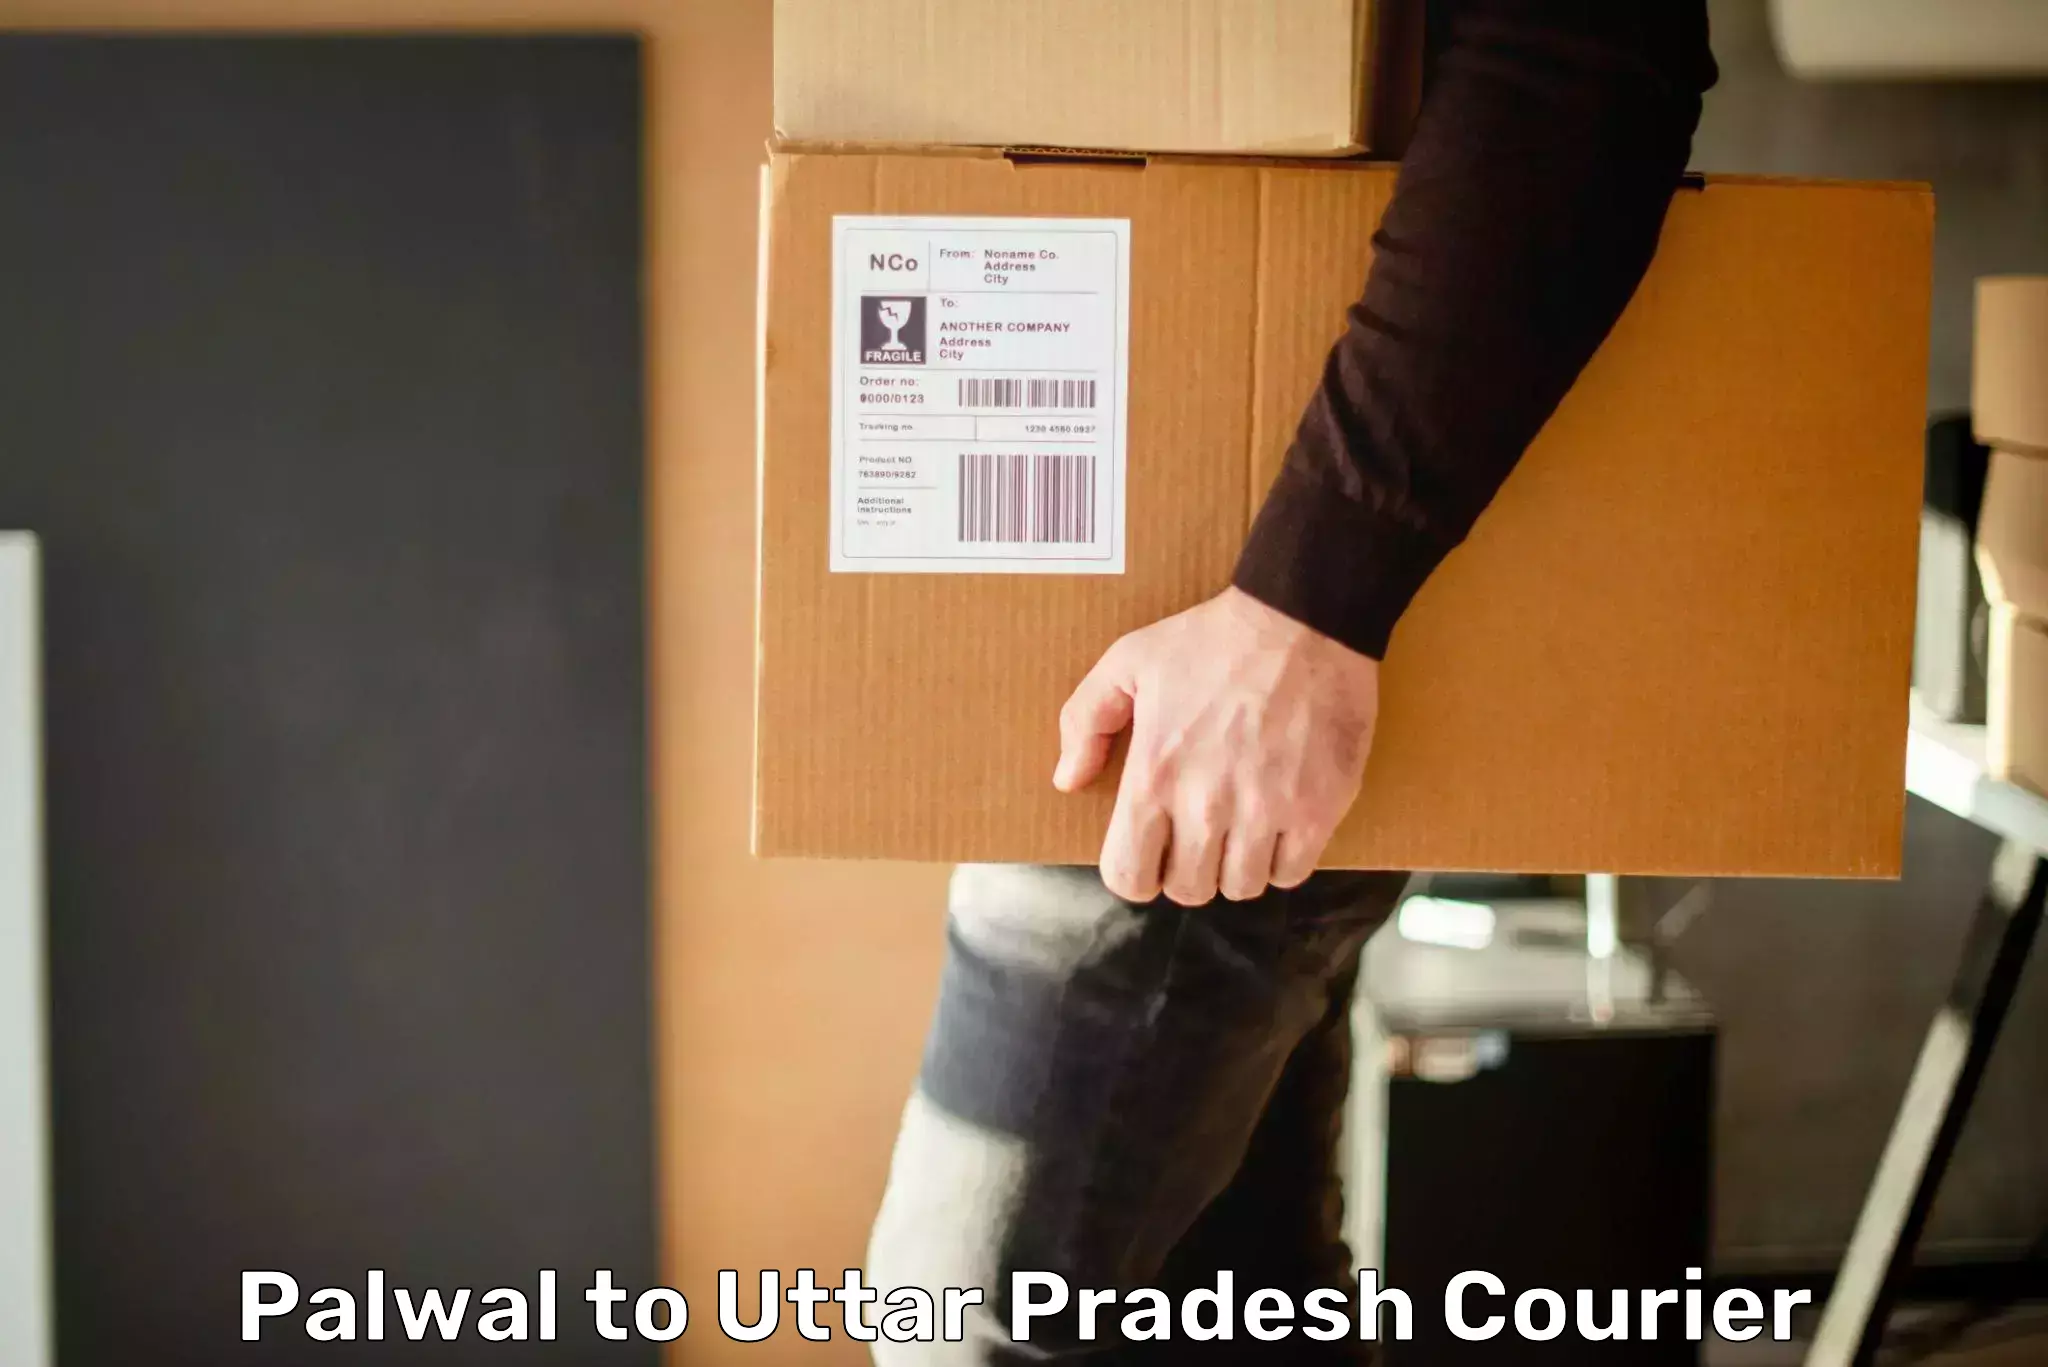 Expedited shipping methods Palwal to Renukoot